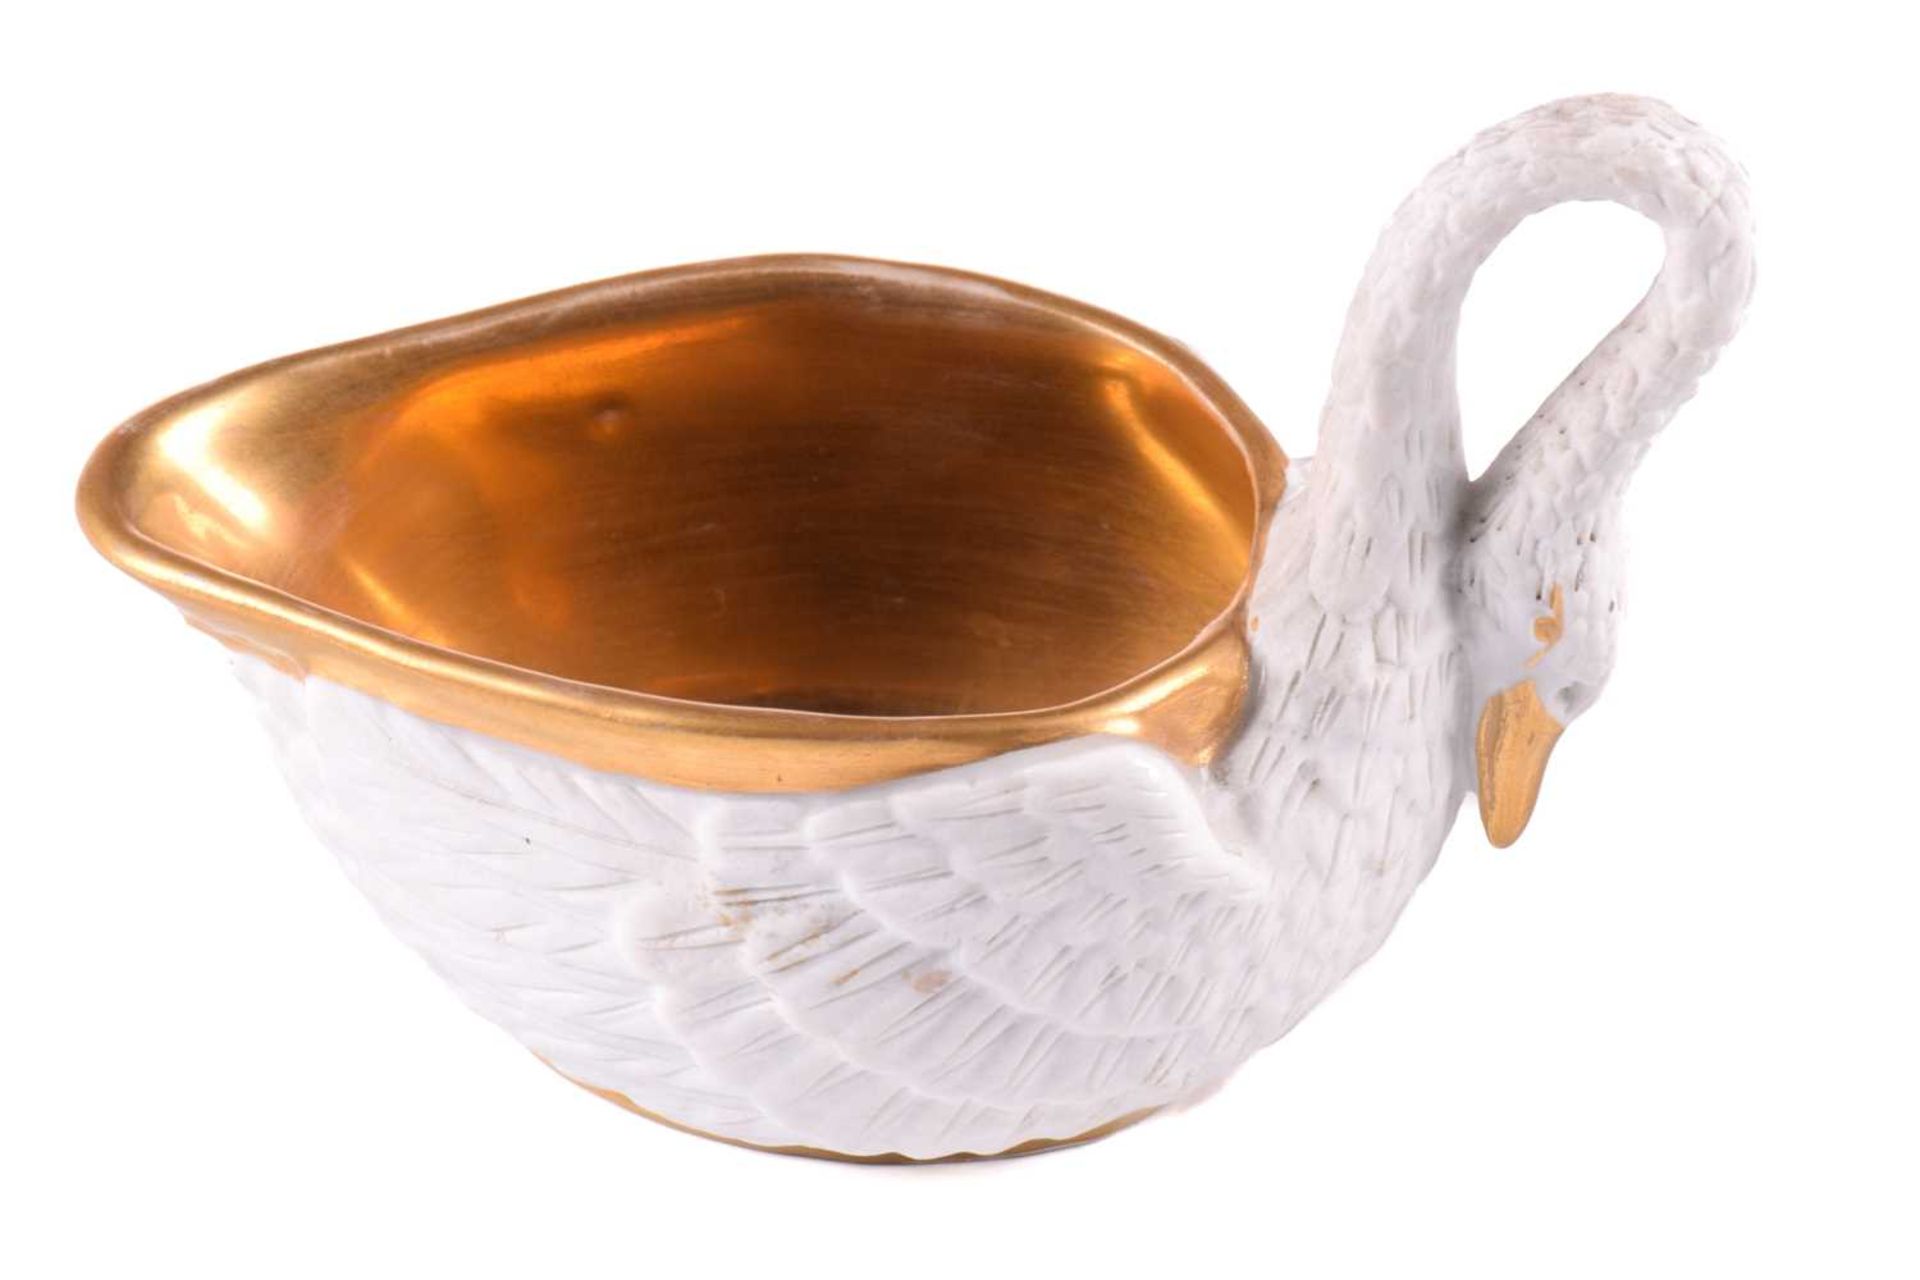 A Vienna bisque porcelain swan sauce boat early 20th century, with a gilded interior, based on an - Image 3 of 21